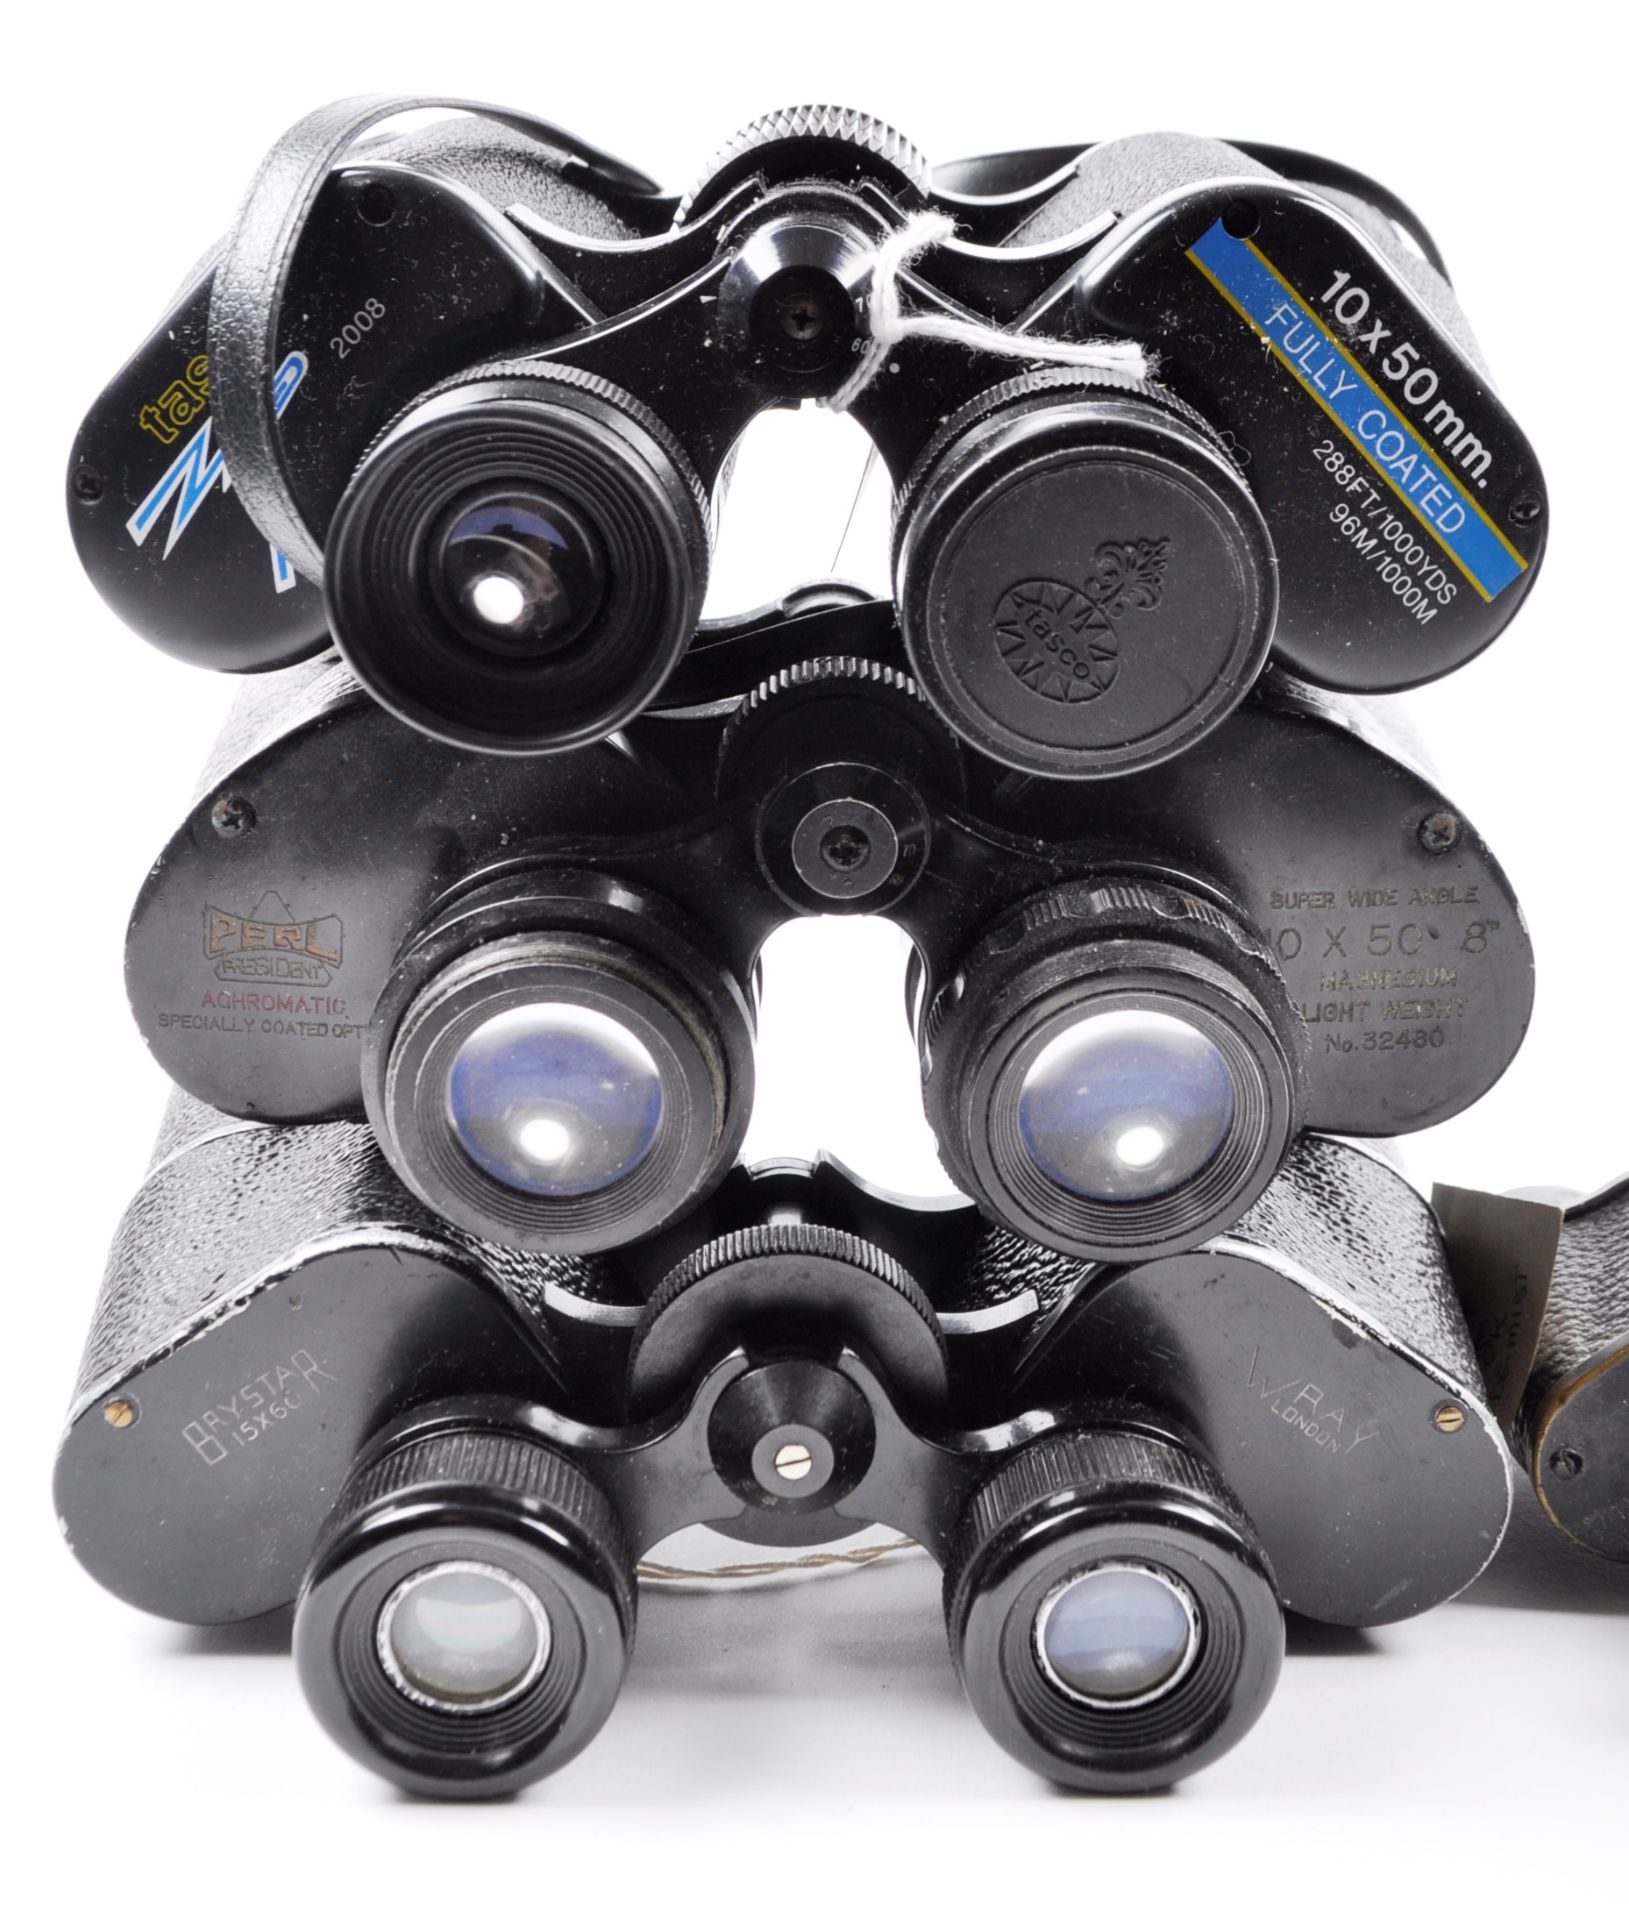 COLLECTION OF ASSORTED VINTAGE BNOCULARS - Image 3 of 6